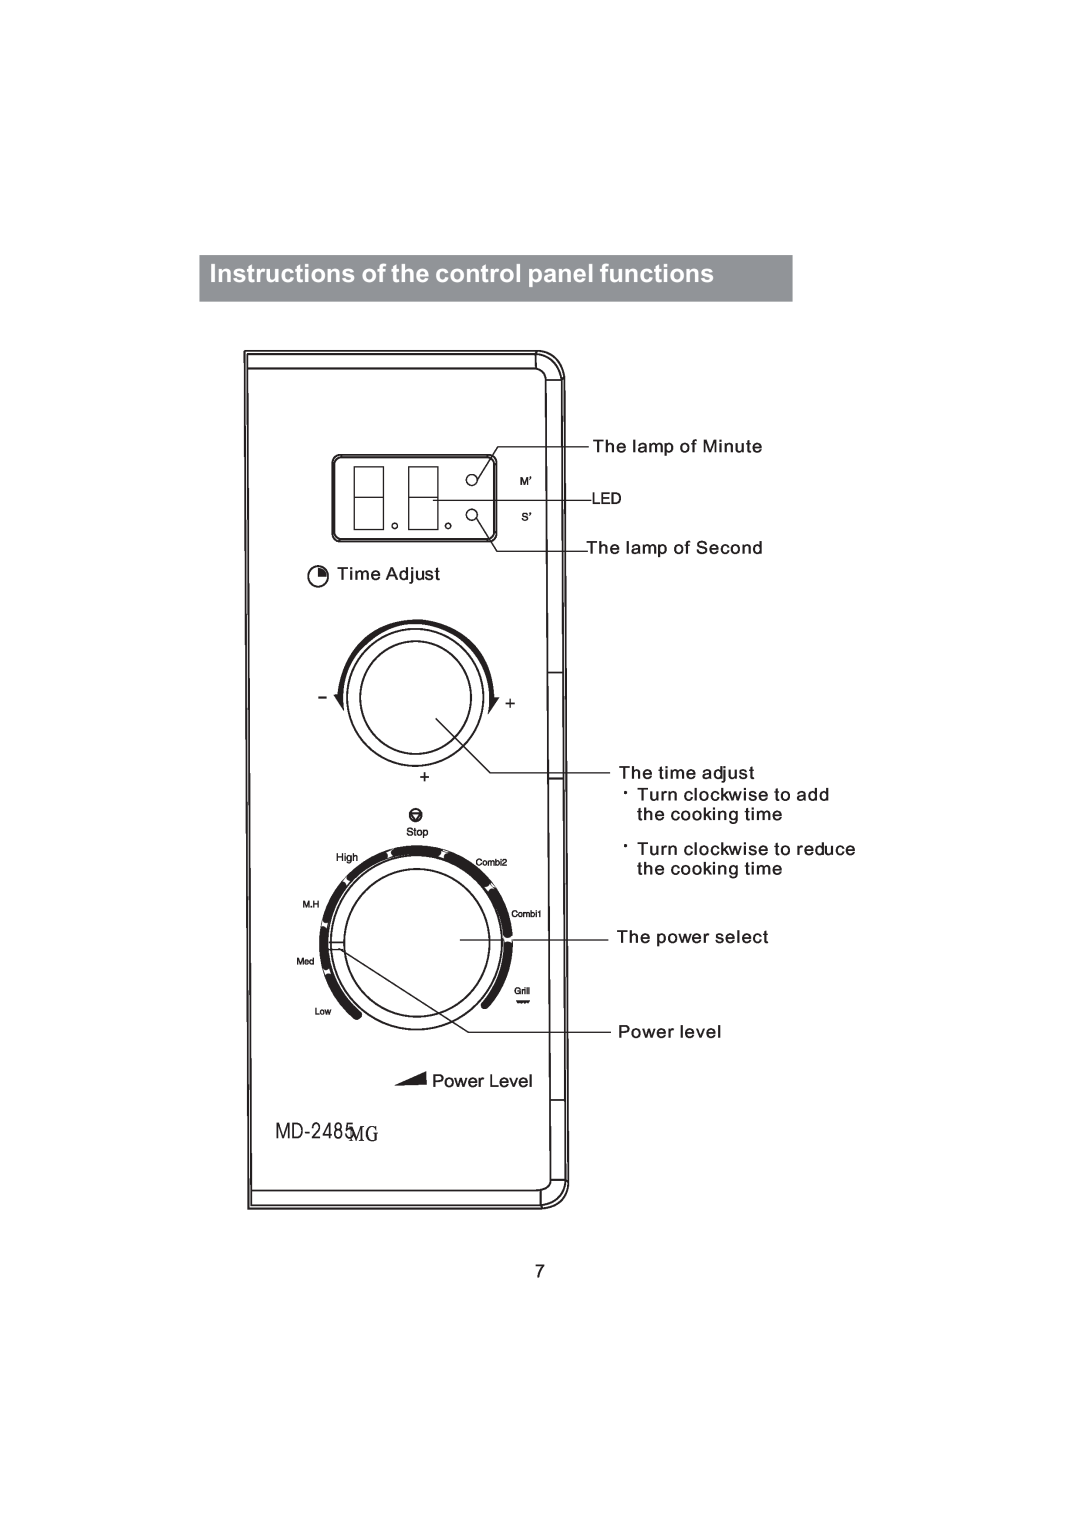 Haier manual Instructions of the control panel functions, MD-2485MG, The lamp of Minute The lamp of Second Time Adjust 